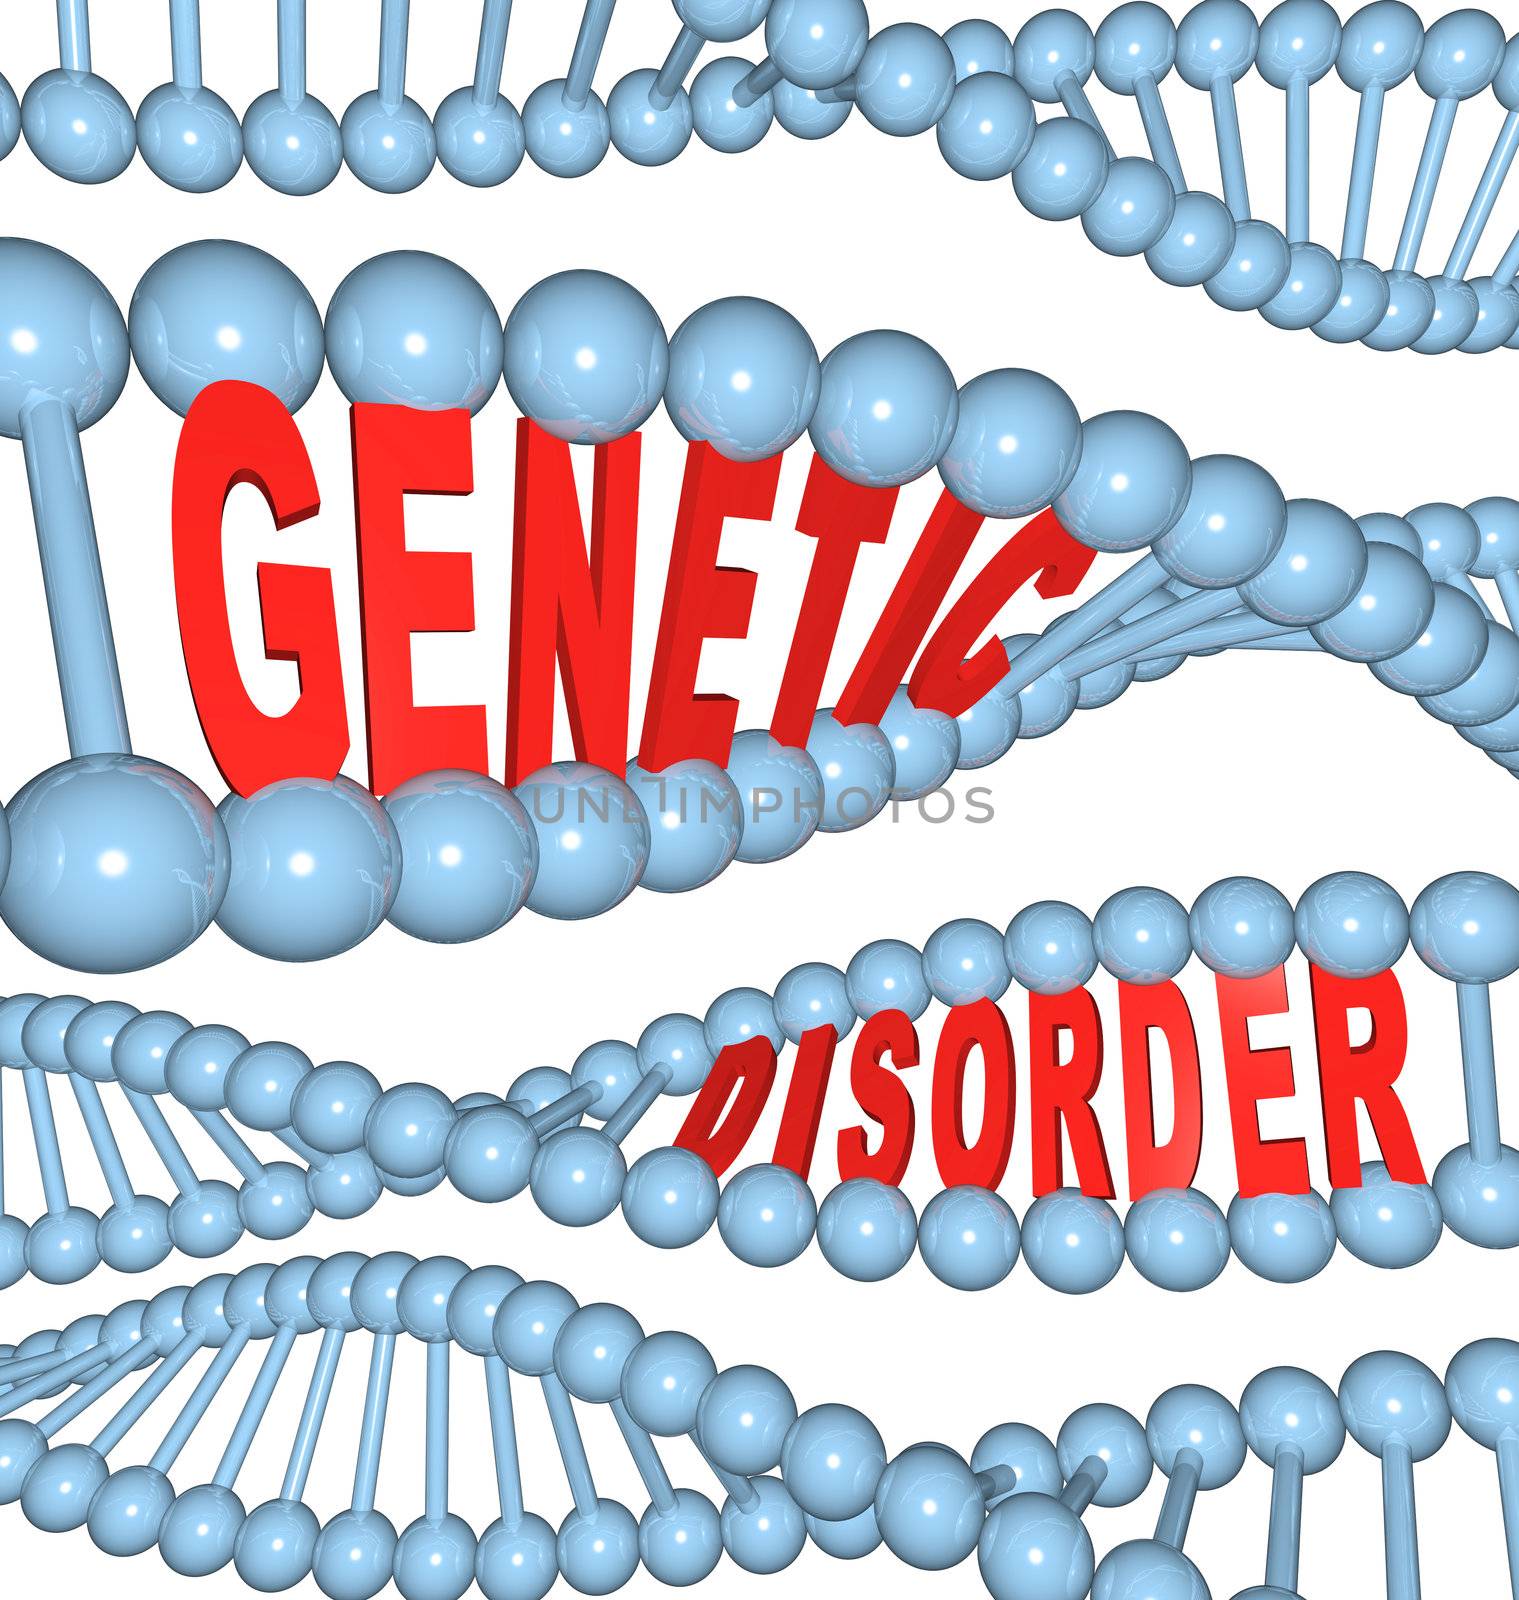 Genetic Disorder - Mutation in DNA Causes Disease by iQoncept